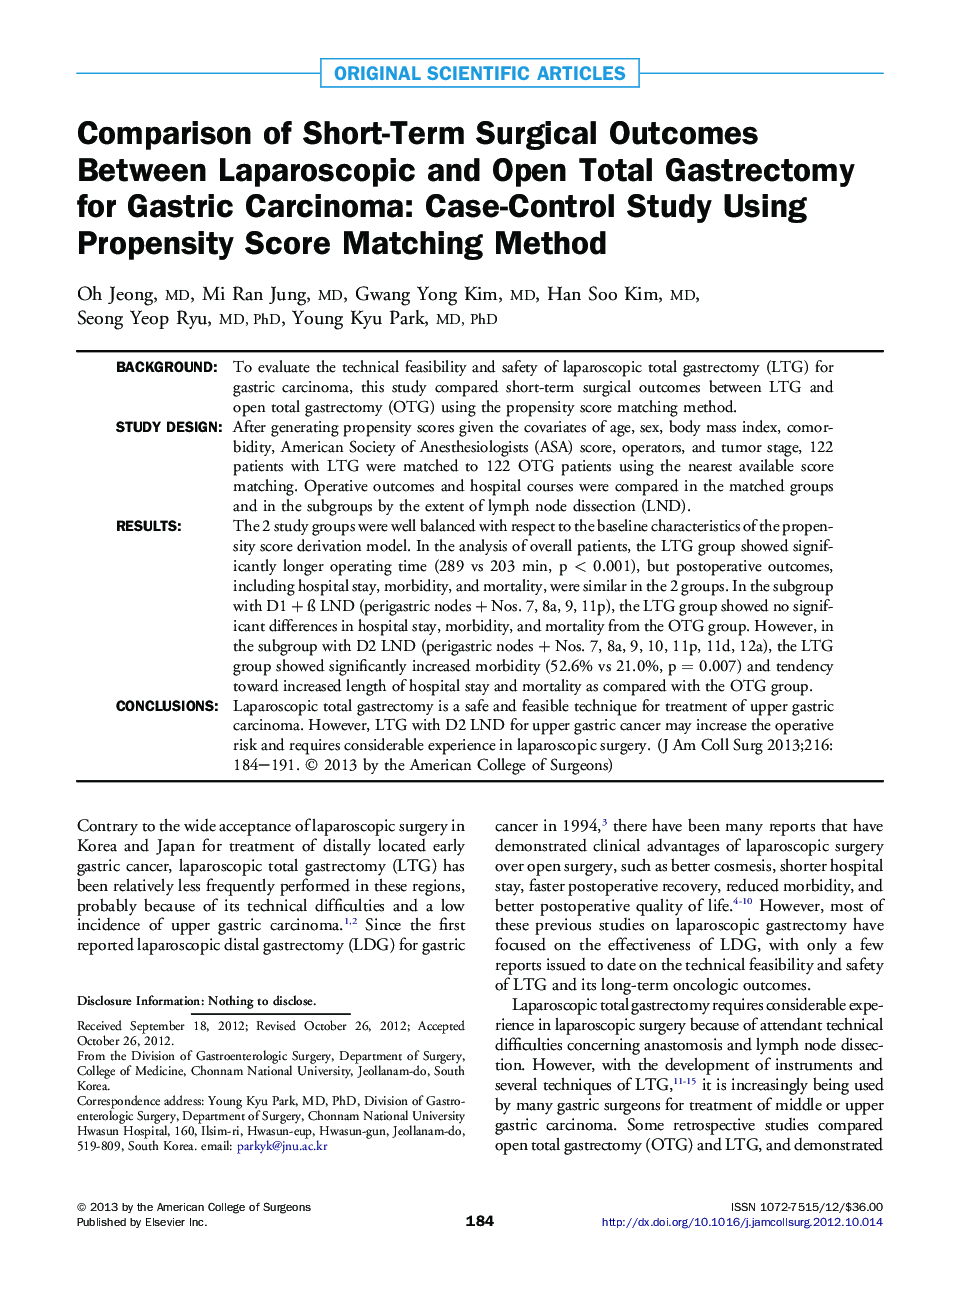 Comparison of Short-Term Surgical Outcomes Between Laparoscopic and Open Total Gastrectomy for Gastric Carcinoma: Case-Control Study Using Propensity Score Matching Method 